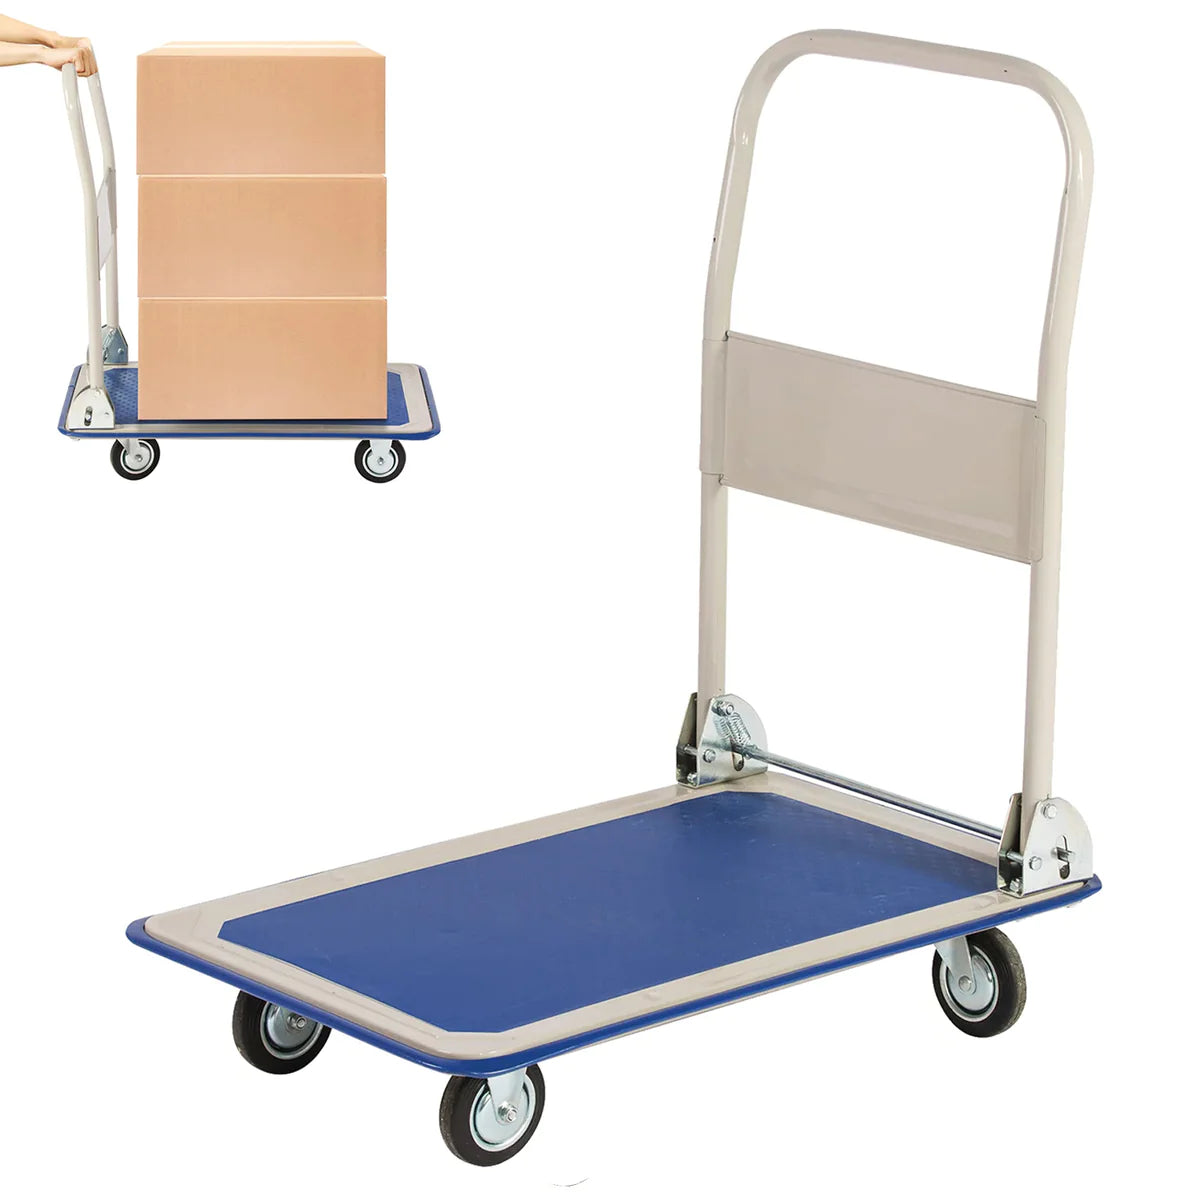 Collapsible Platform Cart Hand Truck Moving Push Flatbed Trolley, 330lbs Capacity